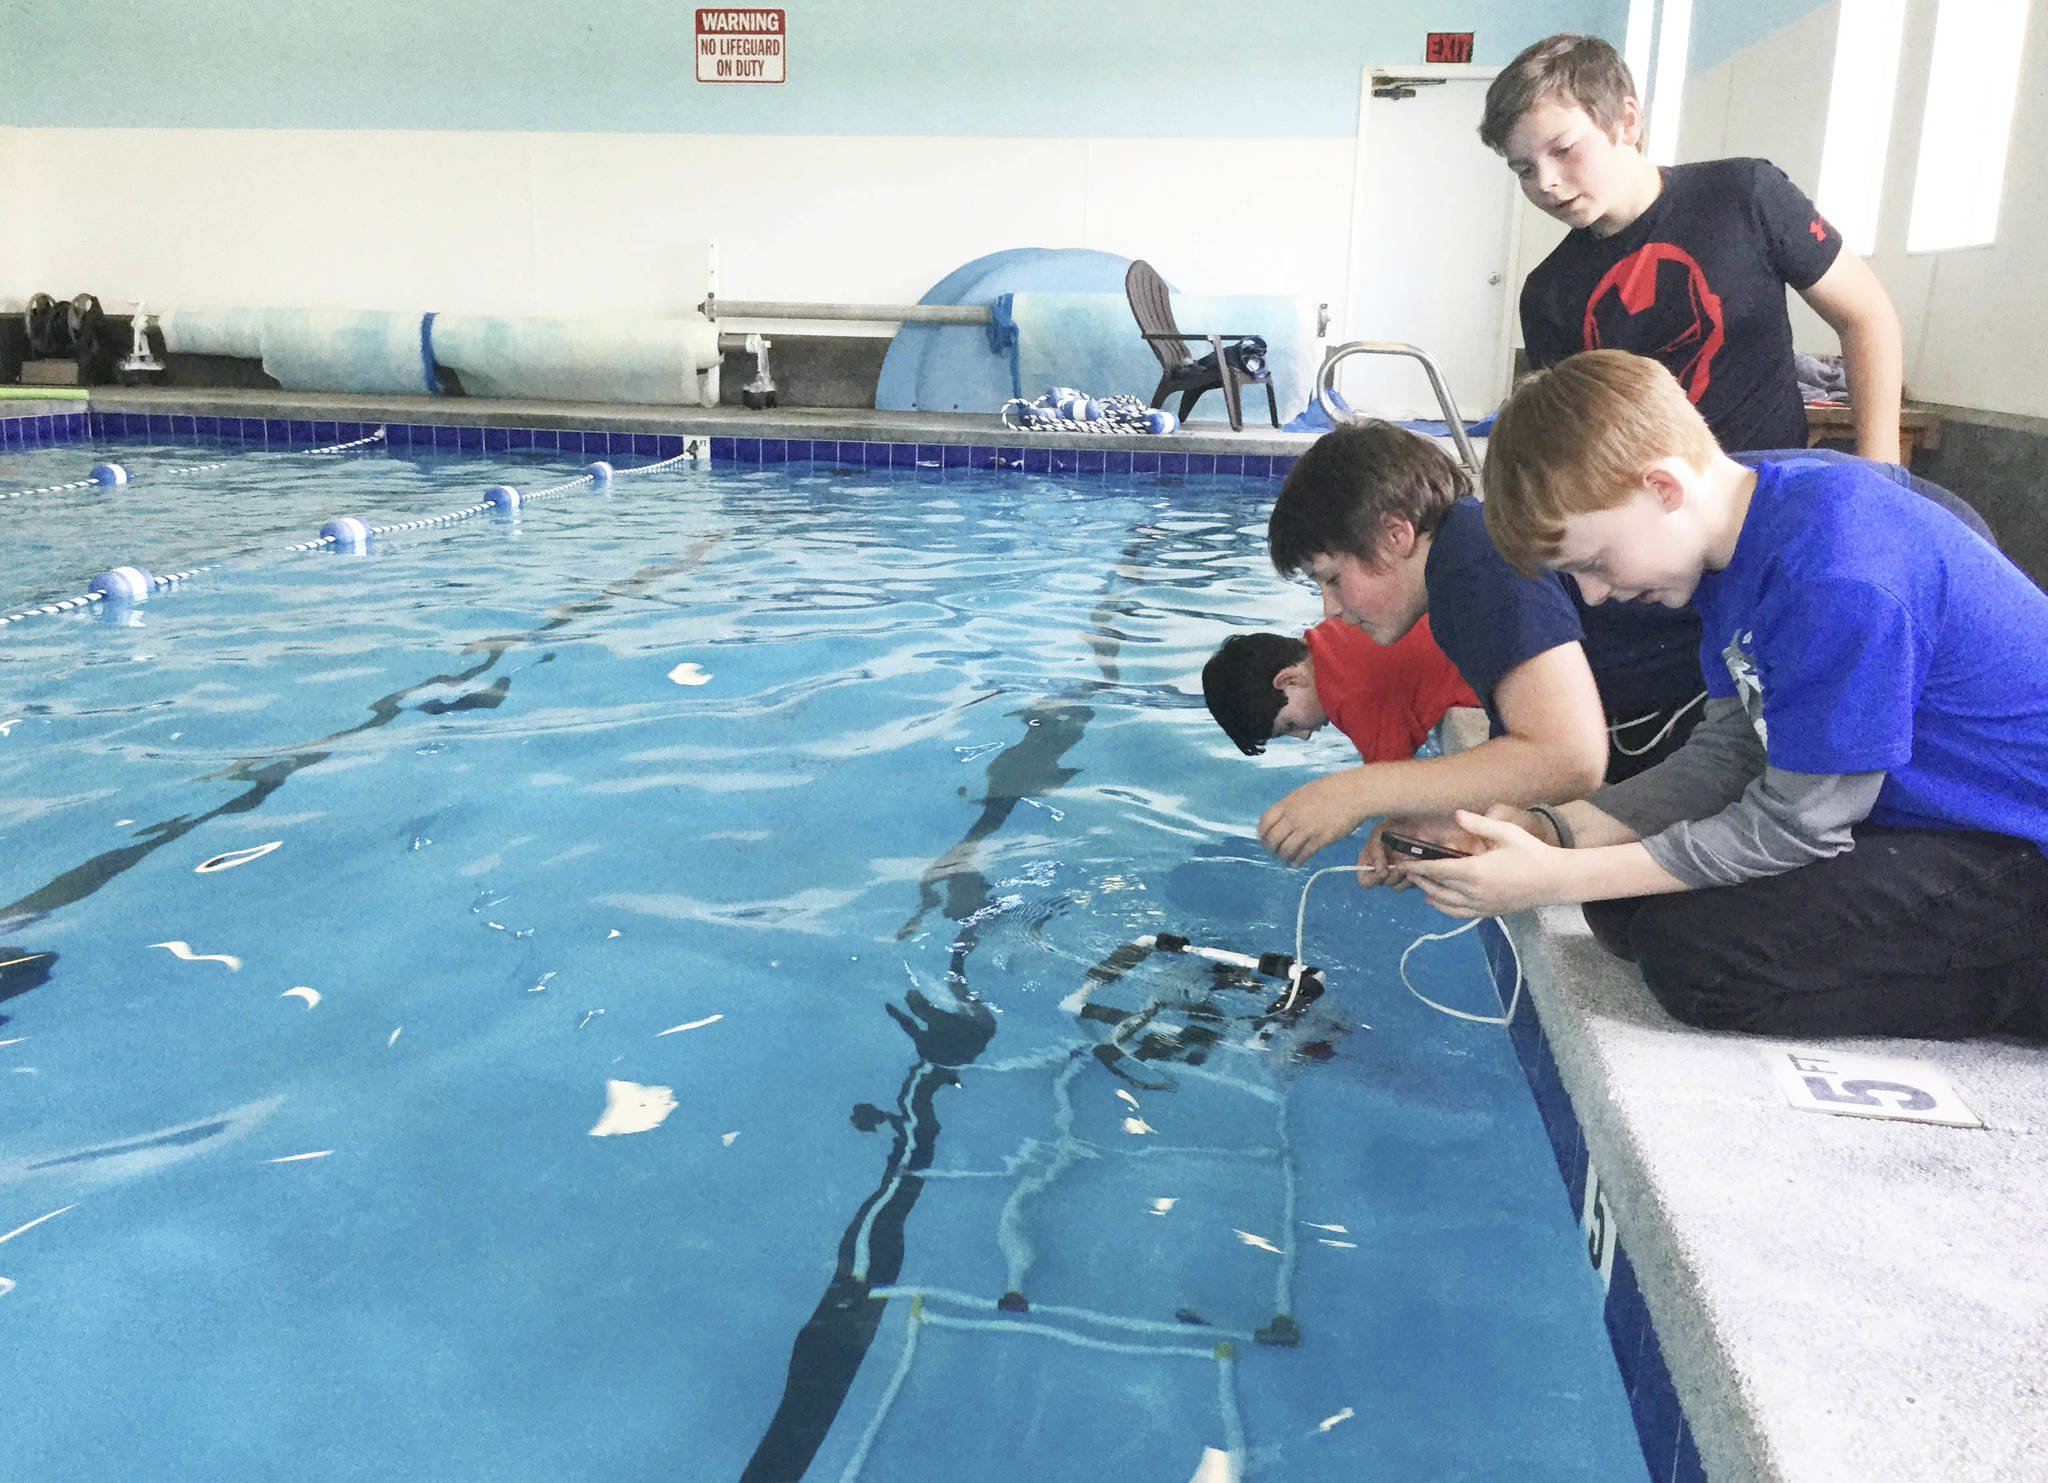 Arlington’s Haller Middle School sixth-graders test their remotely-operated vehicle (ROV) at the Stillaguamish Athletic Center in Arlington in advance of an underwater robotics competition Saturday in Federal Way. Their team, “Shoot The Rapids,” will simulate repairing cracks in a dam, among other challenges. From front, Gavin Dill, Cameron Bates, team captain Josiah Christoffersen and Simon Daley. Not pictured, Jacob Madriaga.